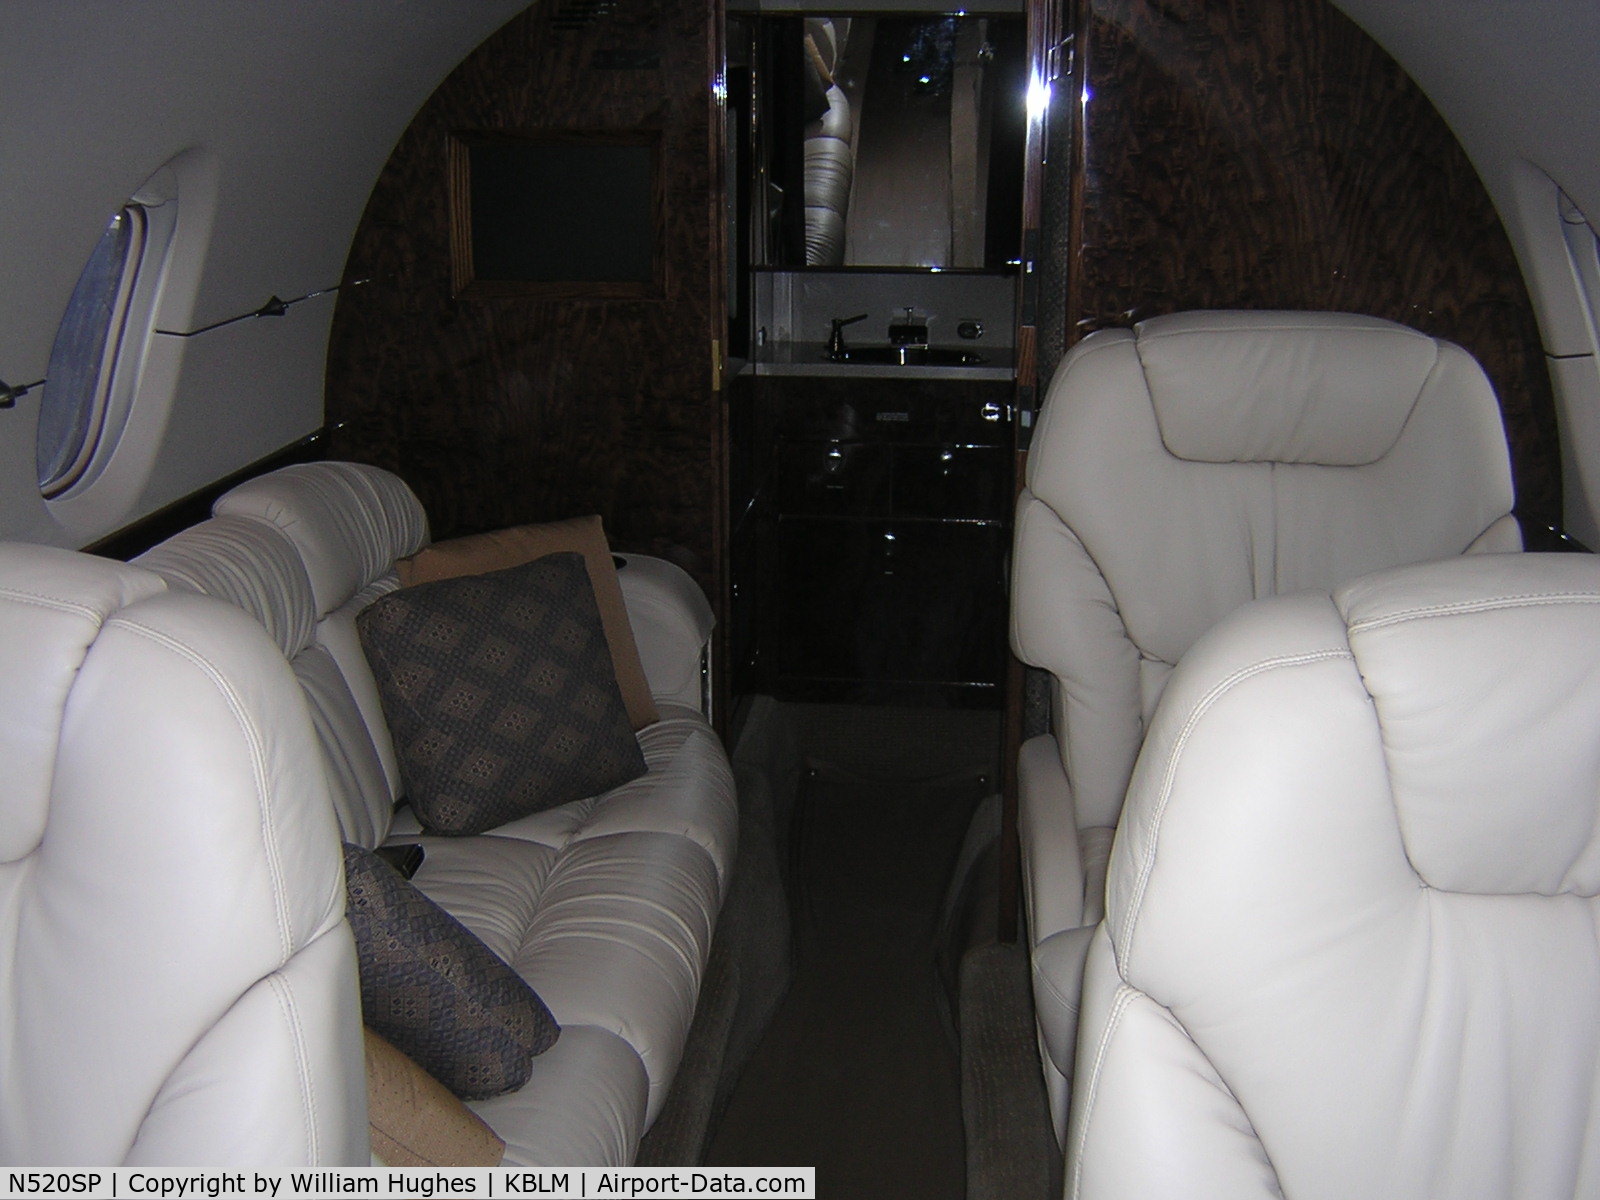 N520SP, 2004 Raytheon Hawker 800XP C/N 258669, couch/bed very comfy for long flights